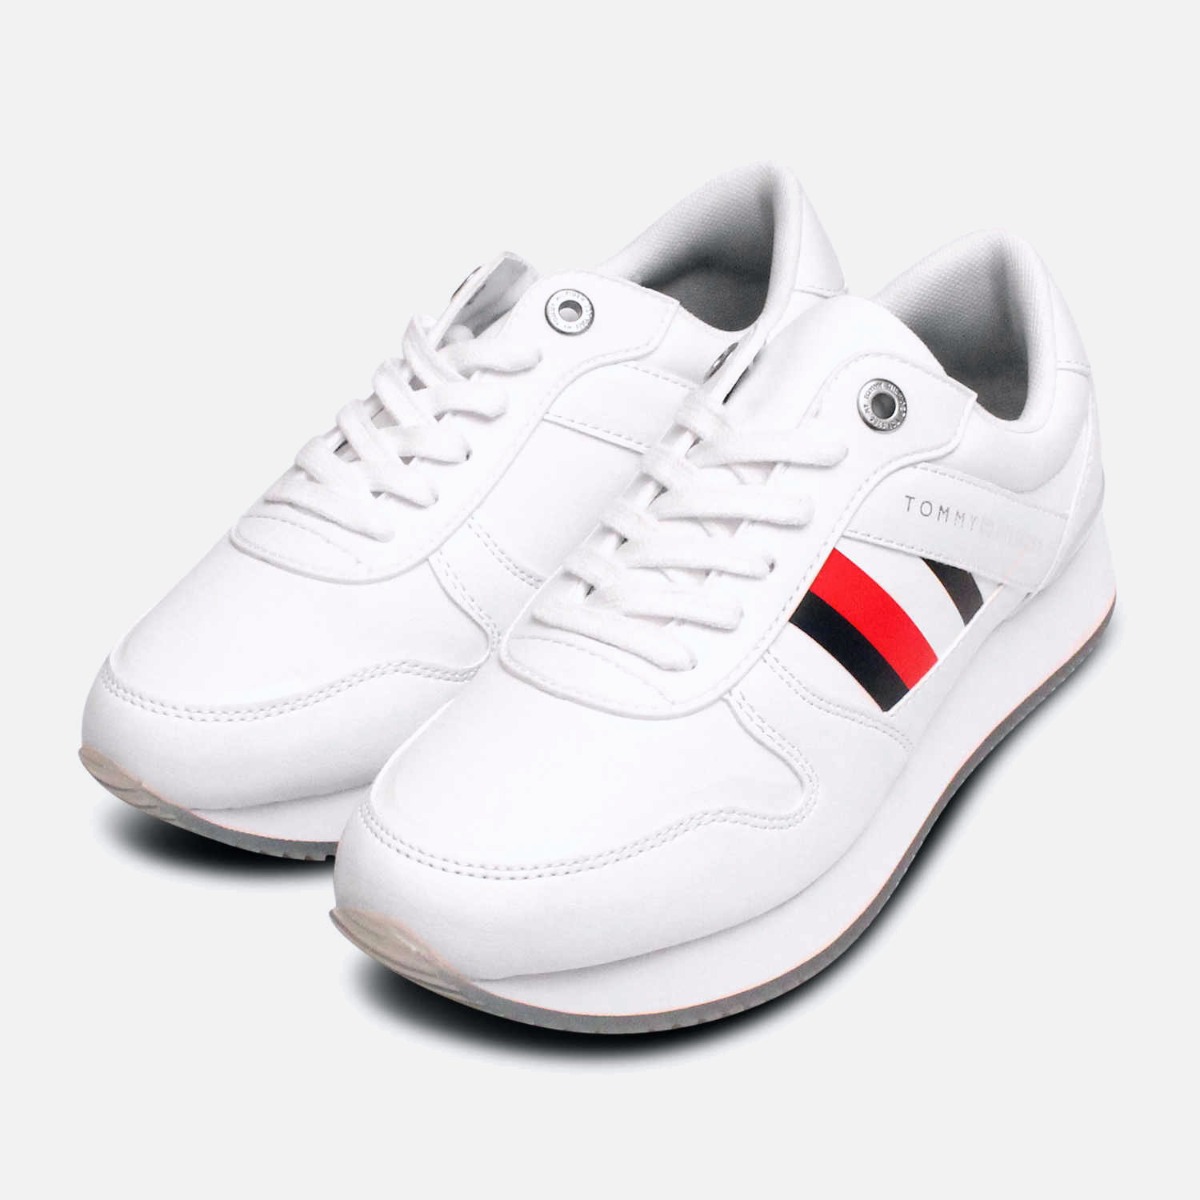 tommy hilfiger leather city sneaker